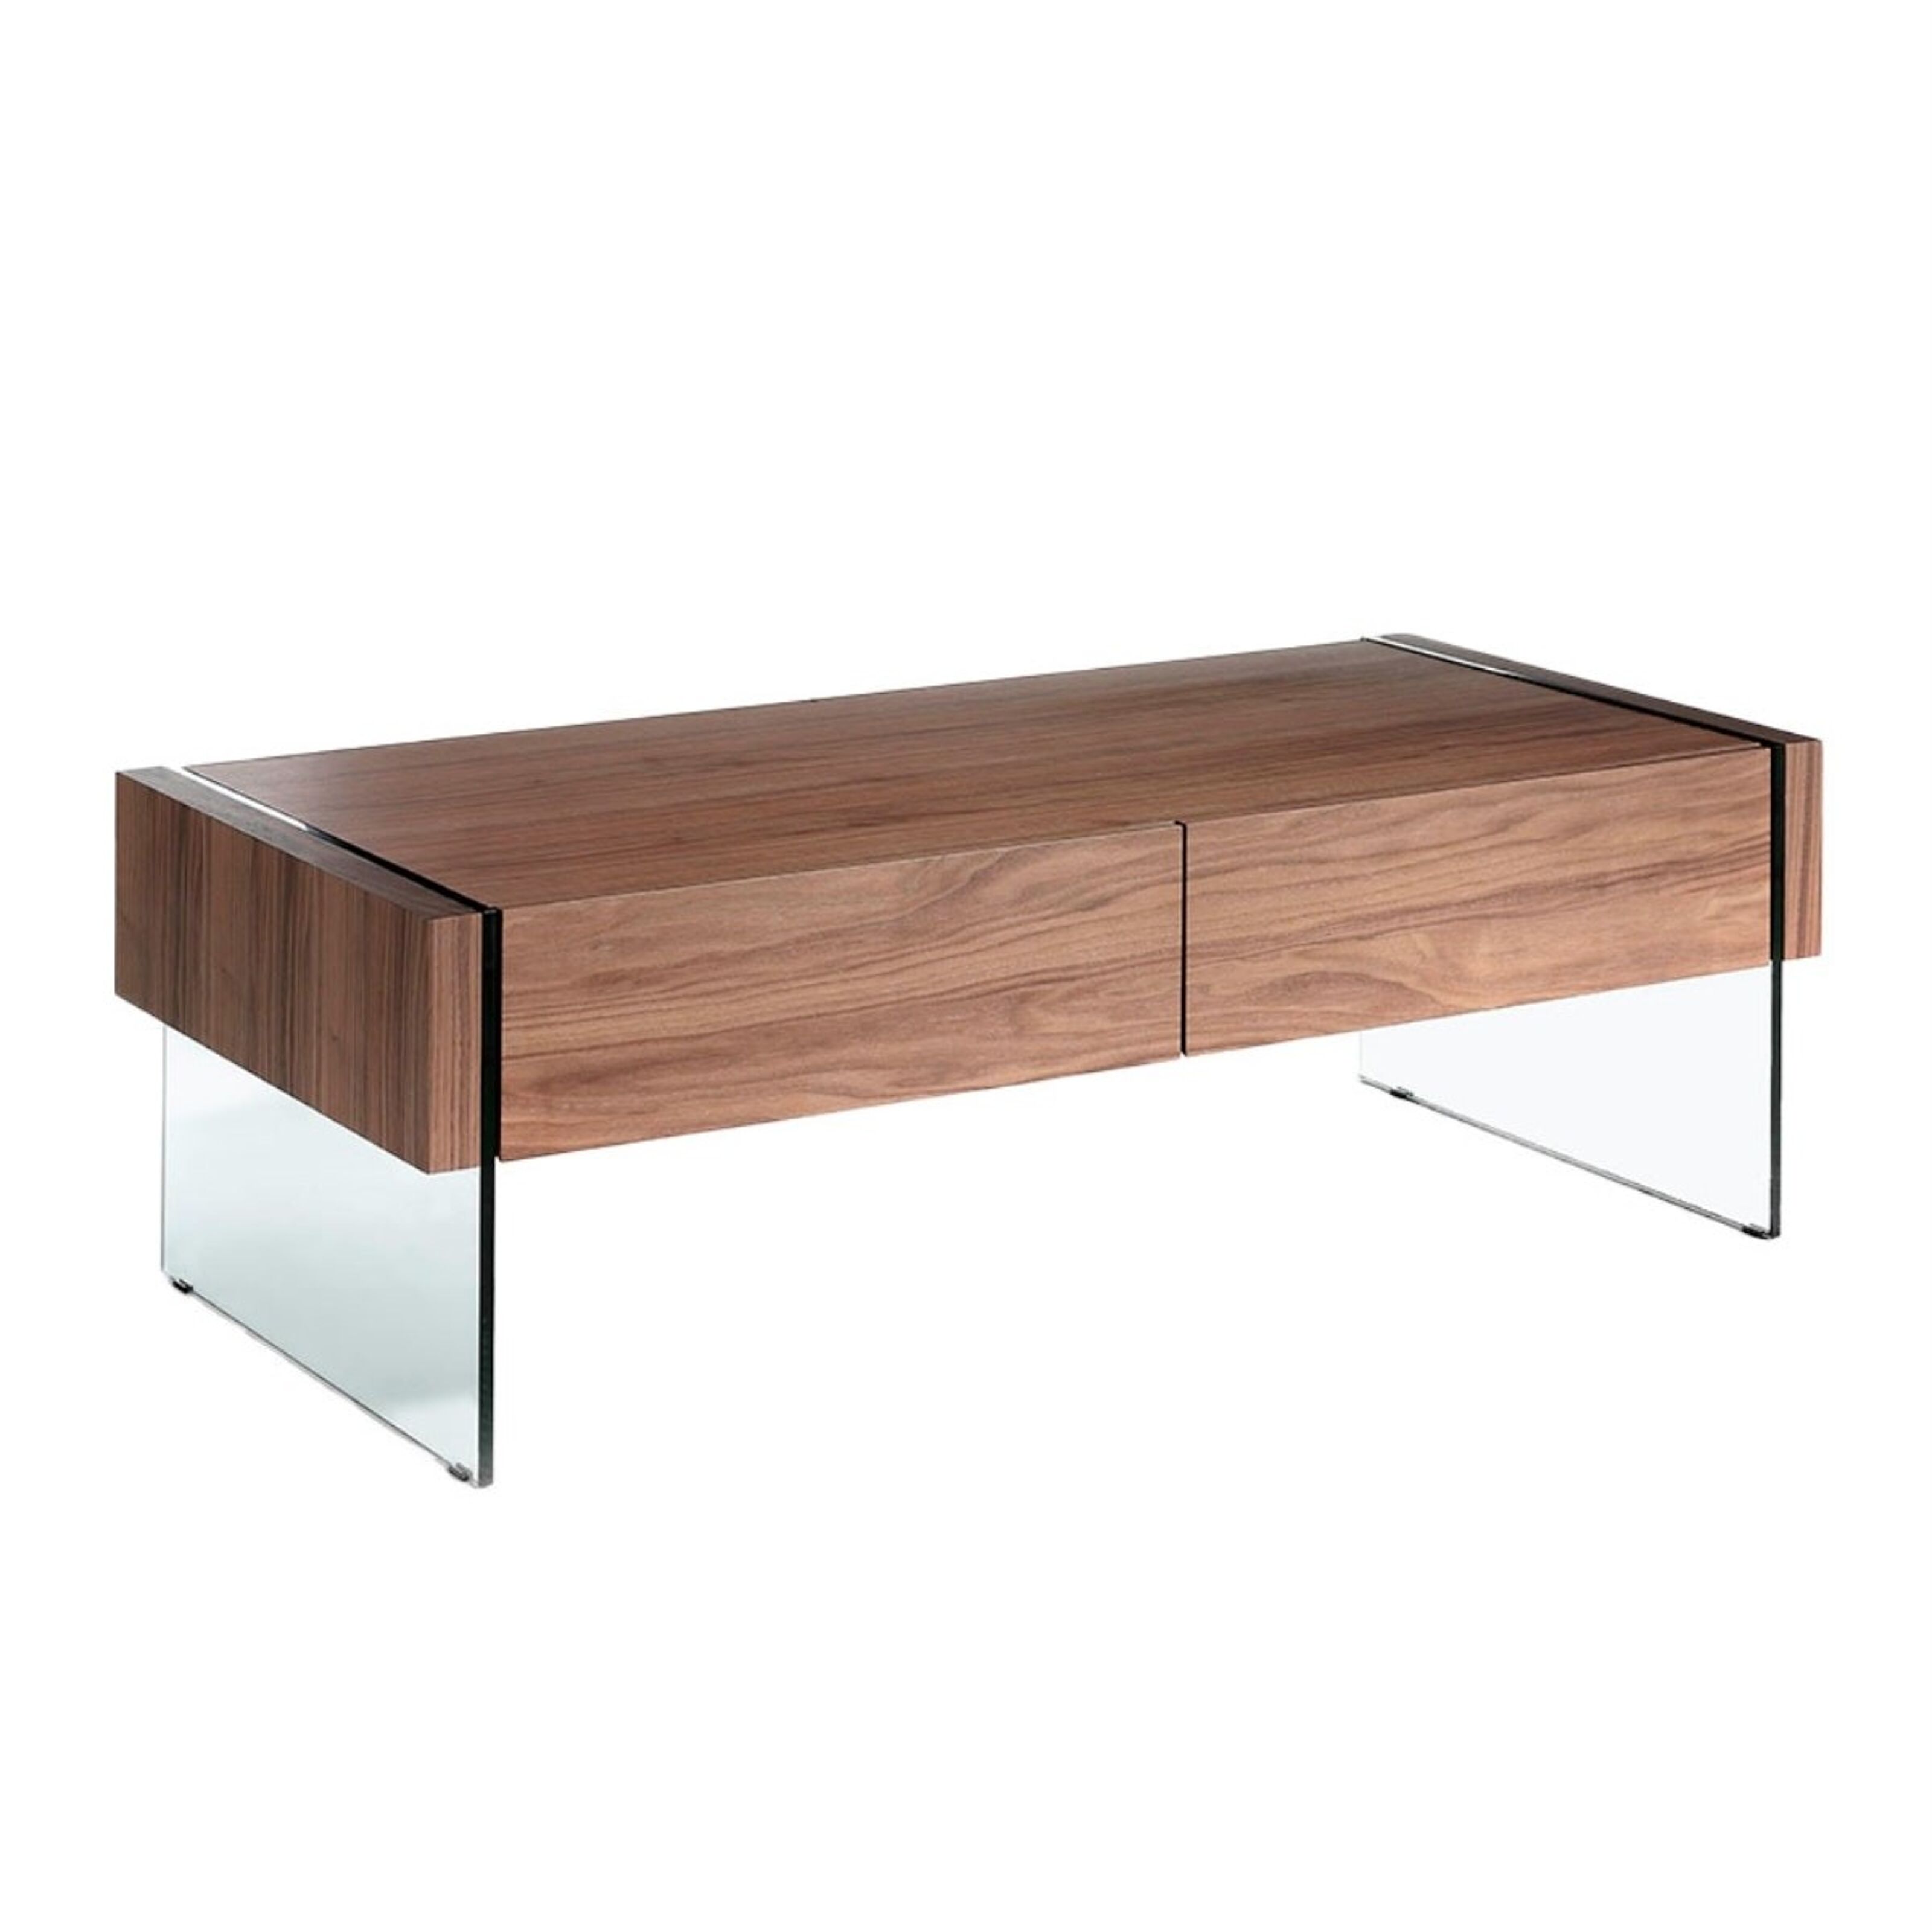 and table center wood veneered model glass Walnut drawers, with wholesale sides tempered 2050 Buy